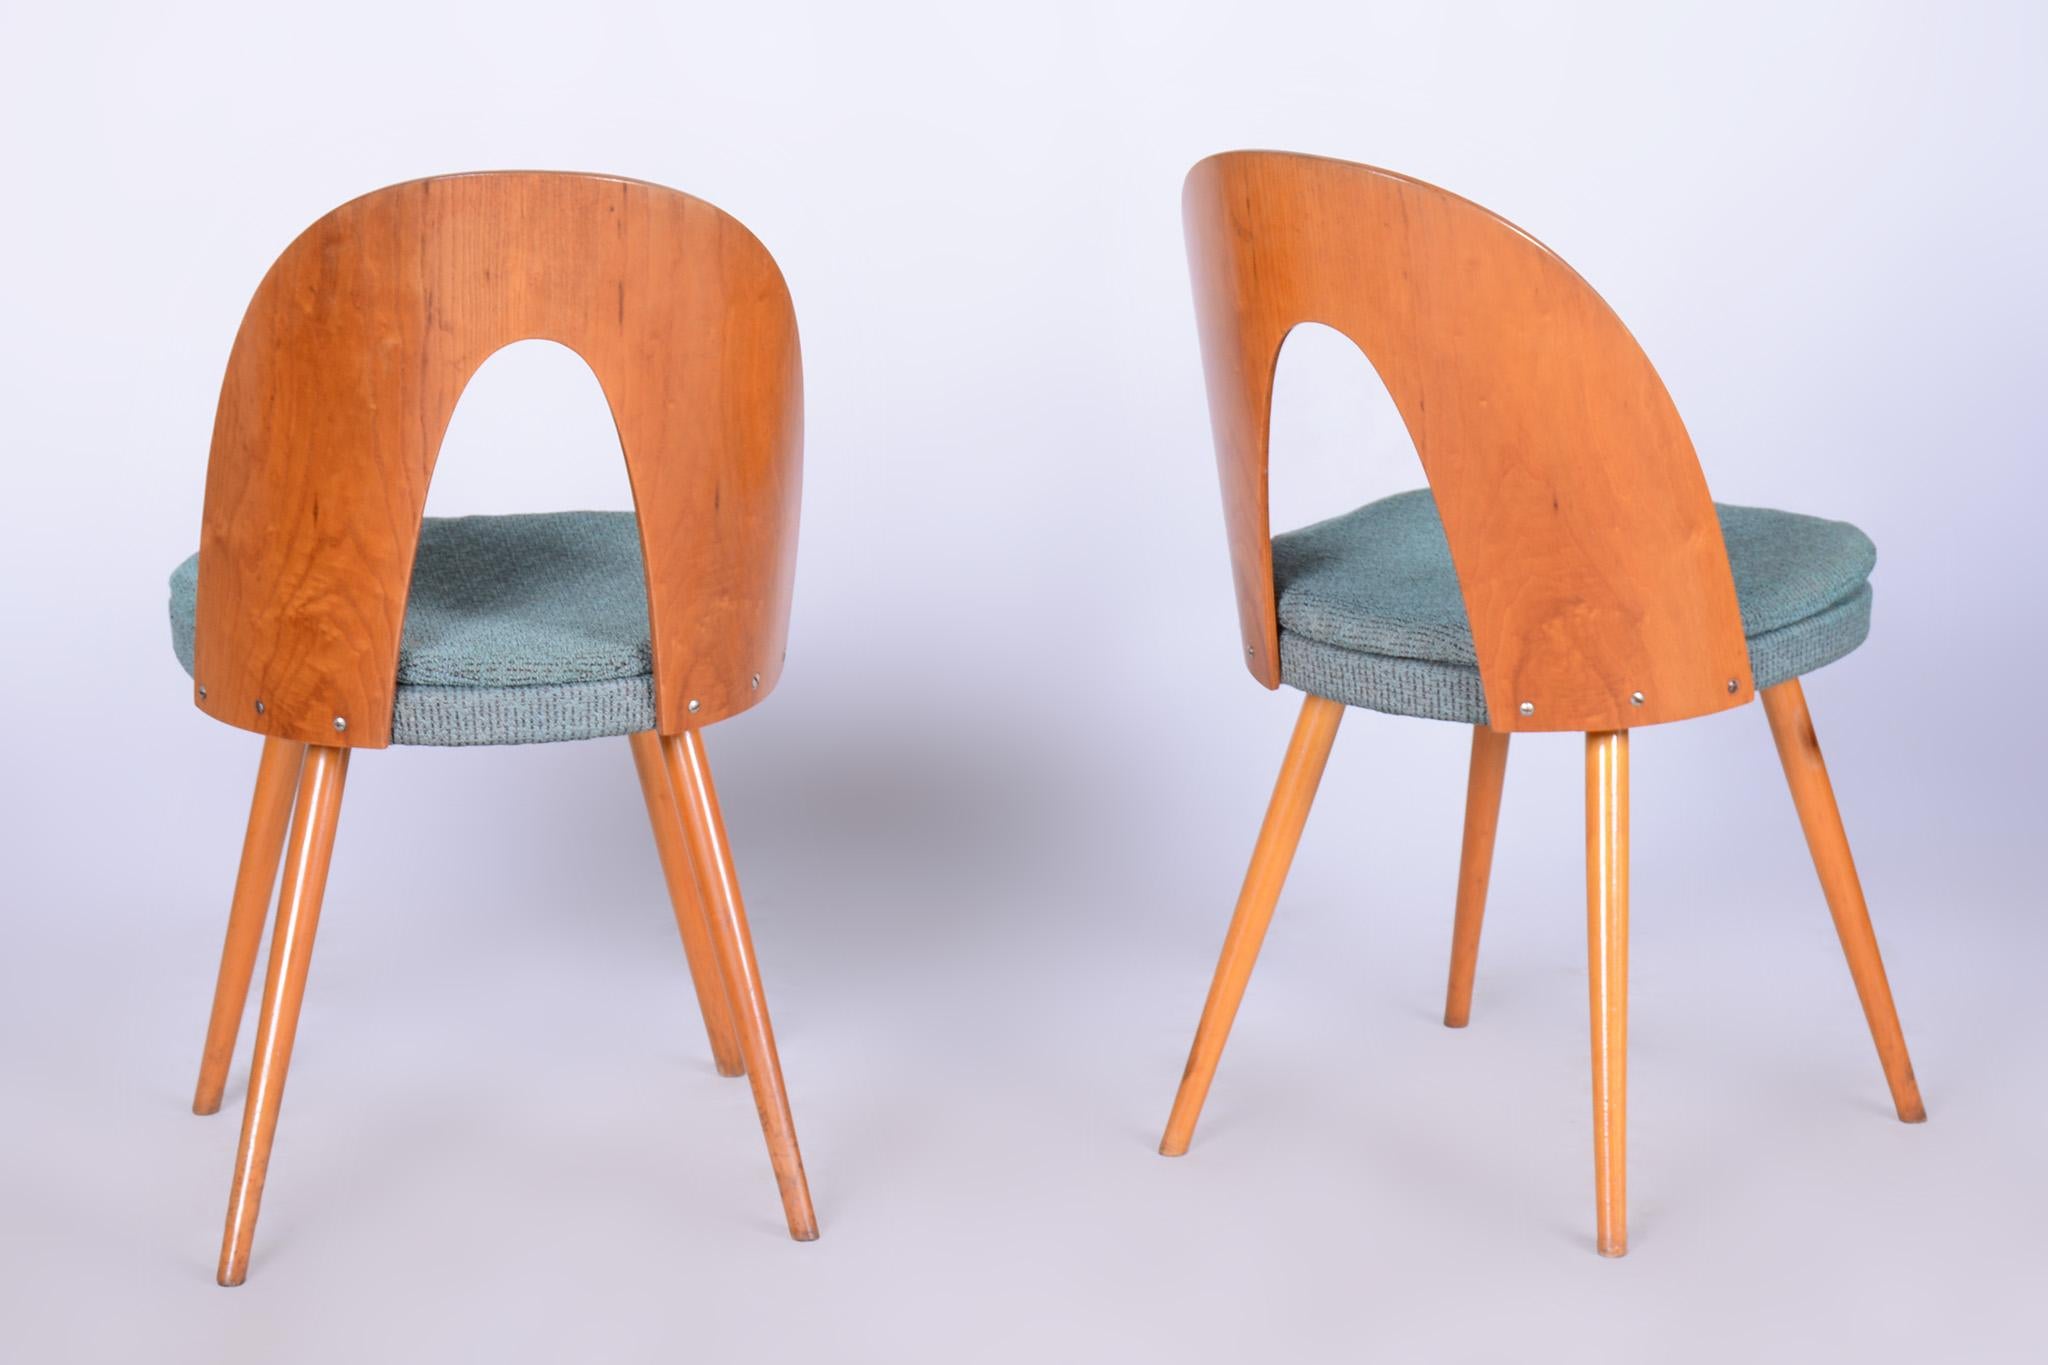 Set of four original midcentury ash chairs by Antonin Suman.

Architect: Antonín Šuman
Source: Czechia
Period: 1930-1939
Material: Ash, Fabric, Upholstery
Well-preserved condition.

Sold as a set.

In pristine original condition, the